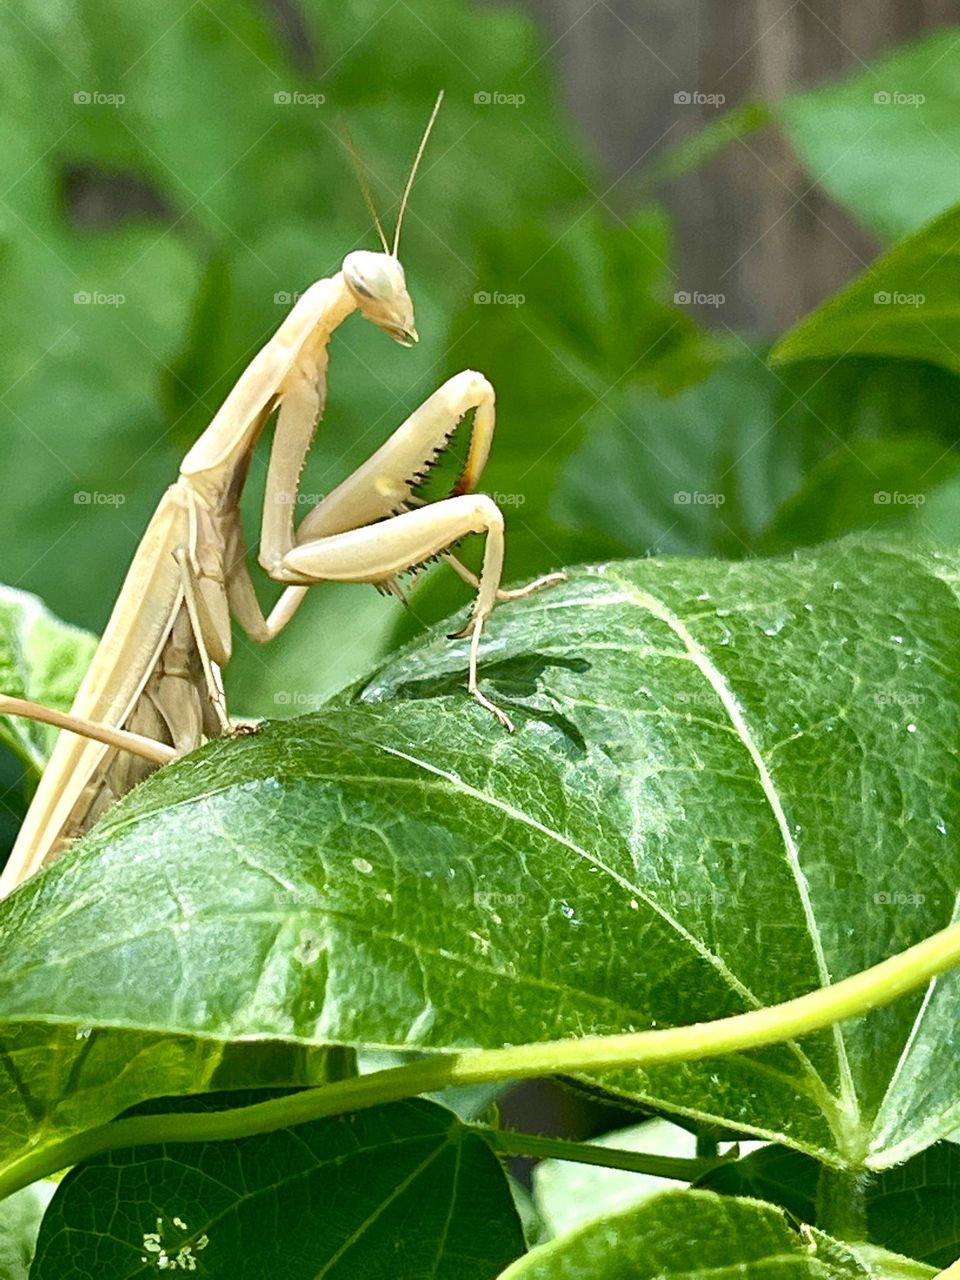 The beautiful white preying mantis on the green leaves at the summer season resting.